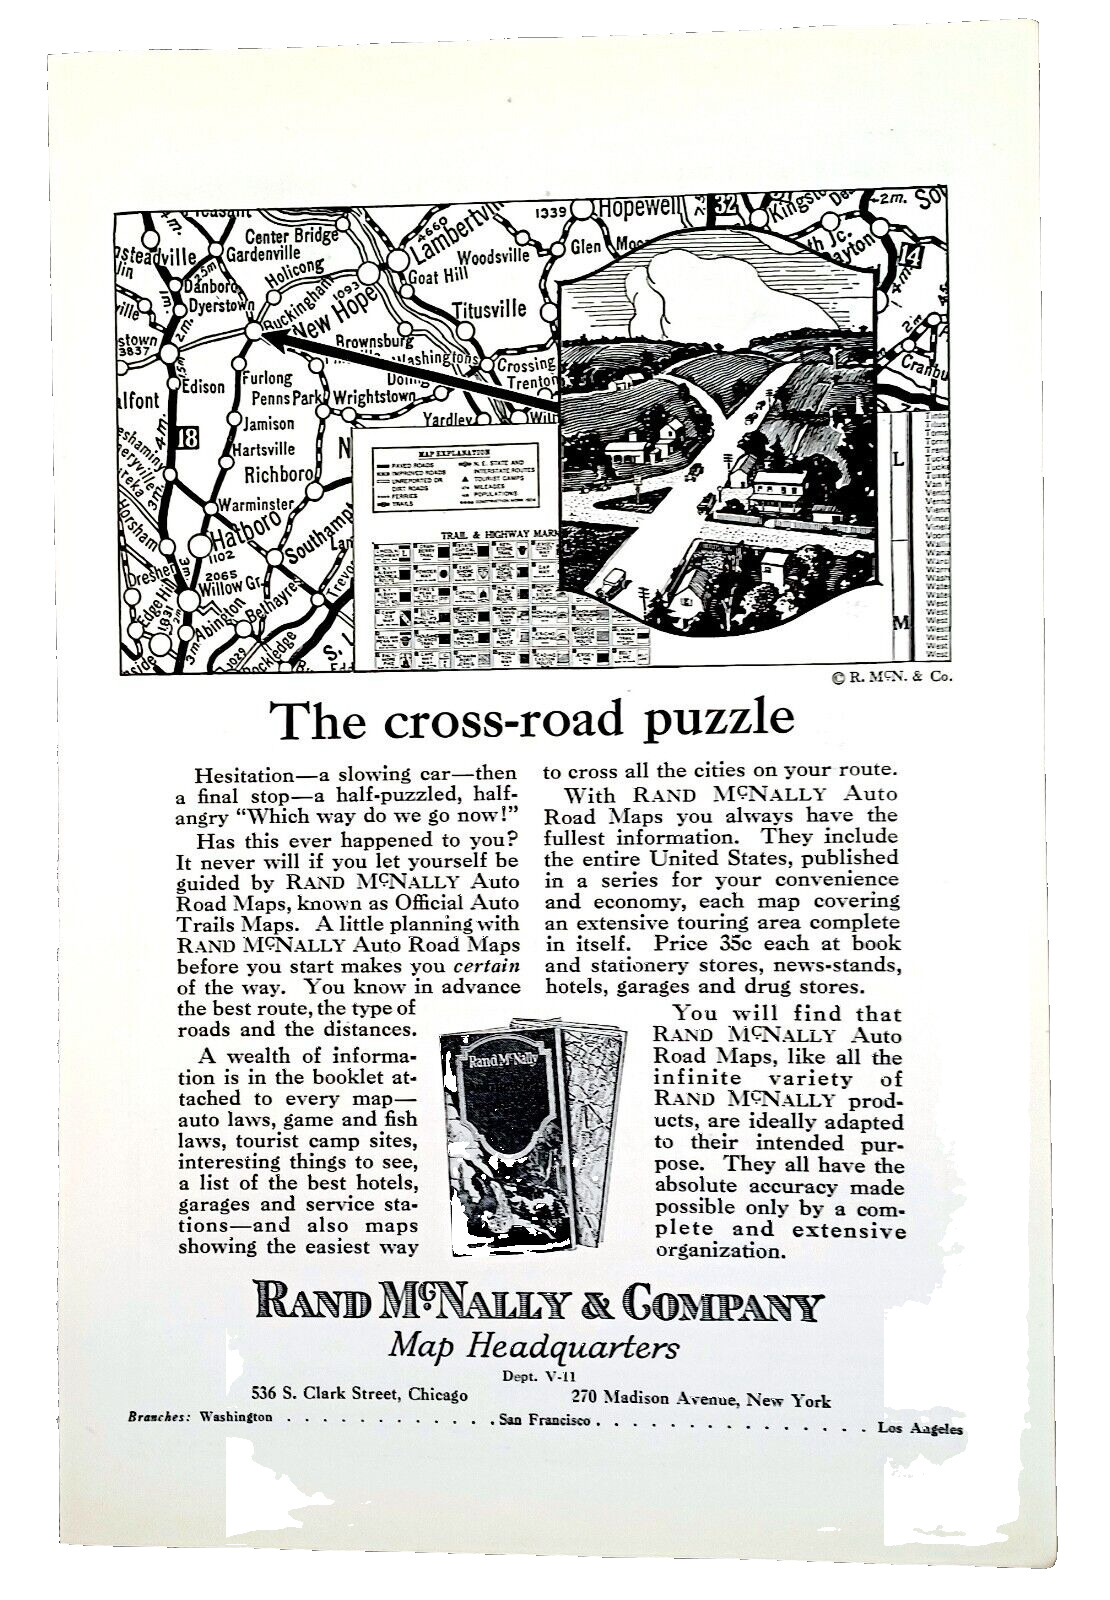 1925 Rand McNally & Co Auto Road Maps Vintage Print Ad The Cross Road Puzzle